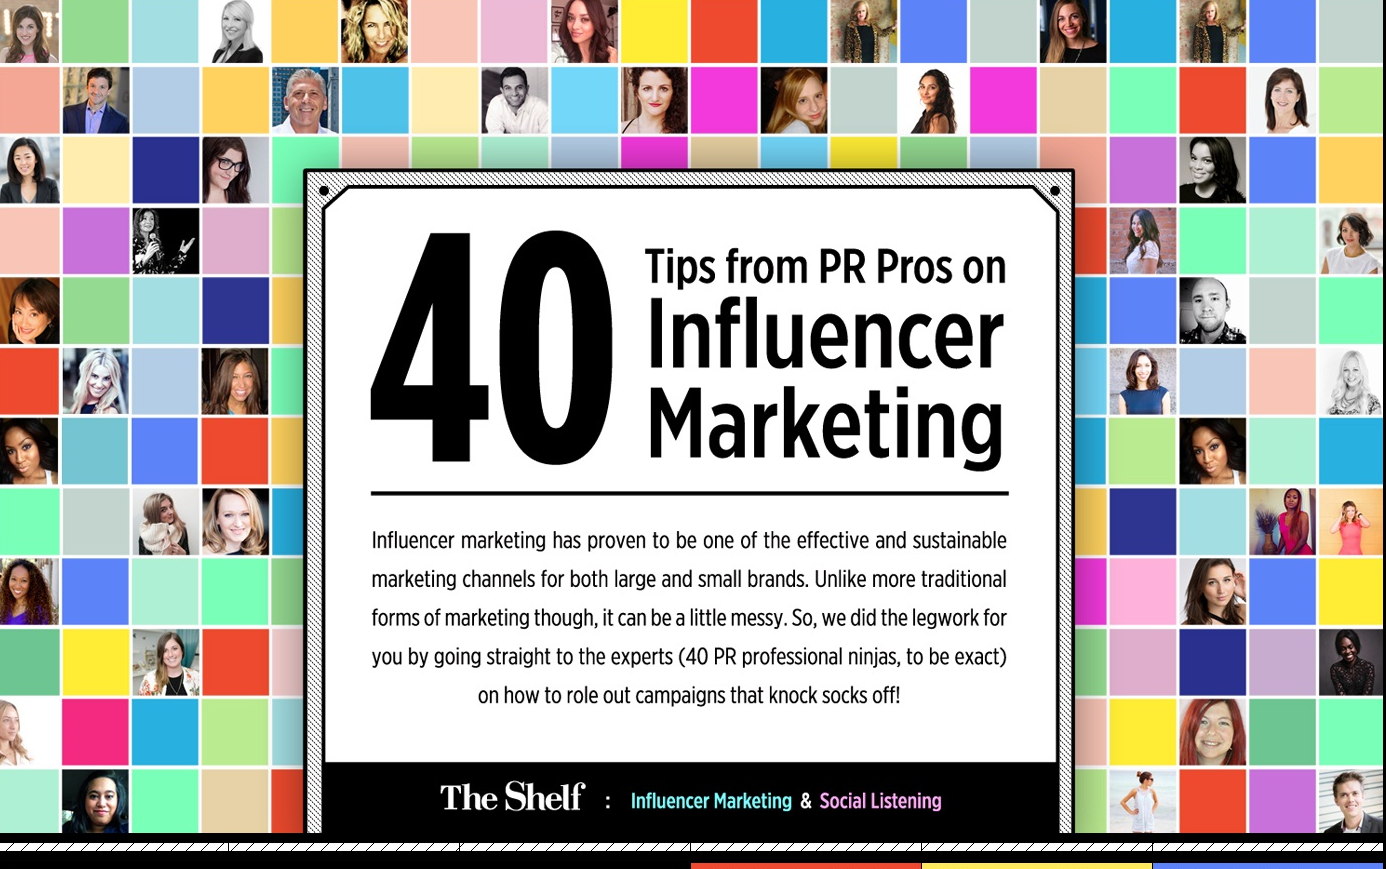 40 Tips from PR Pros on Influencer Marketing